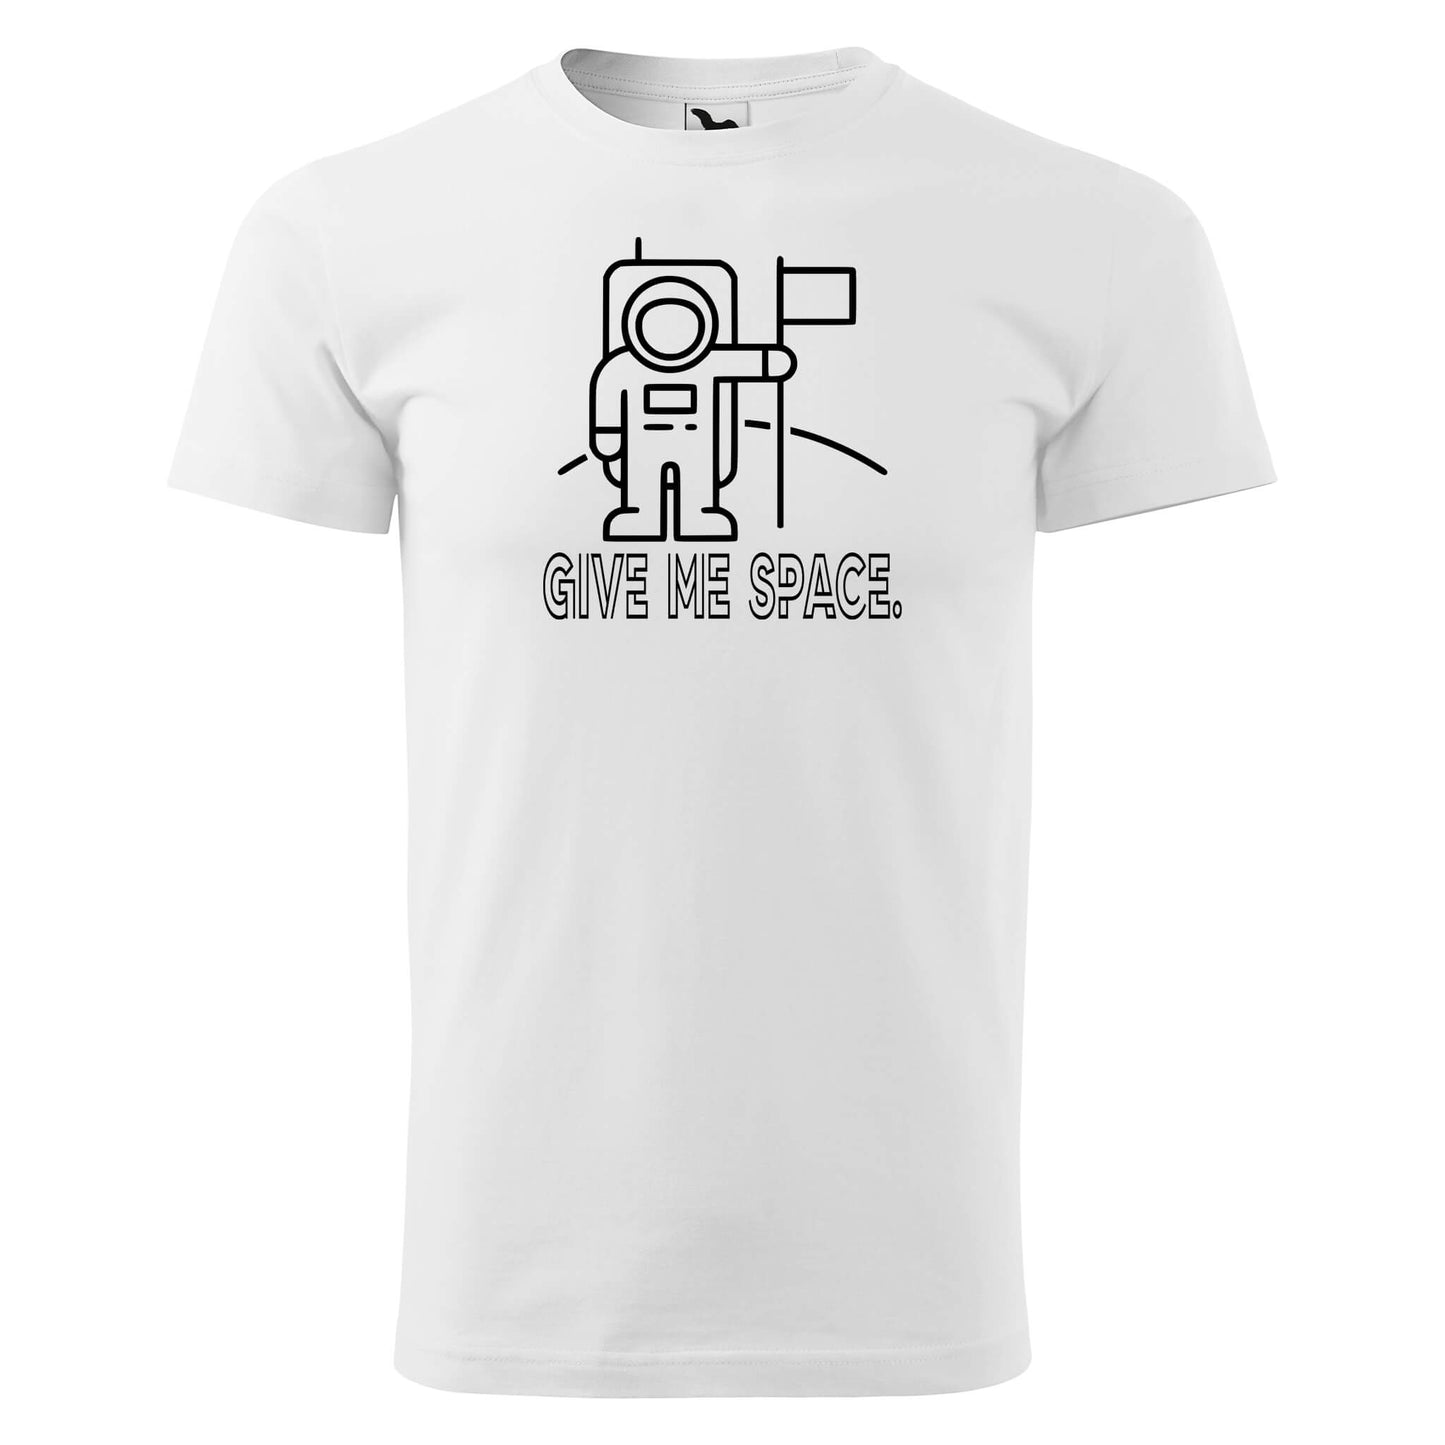 T-shirt - Give me space - rvdesignprint